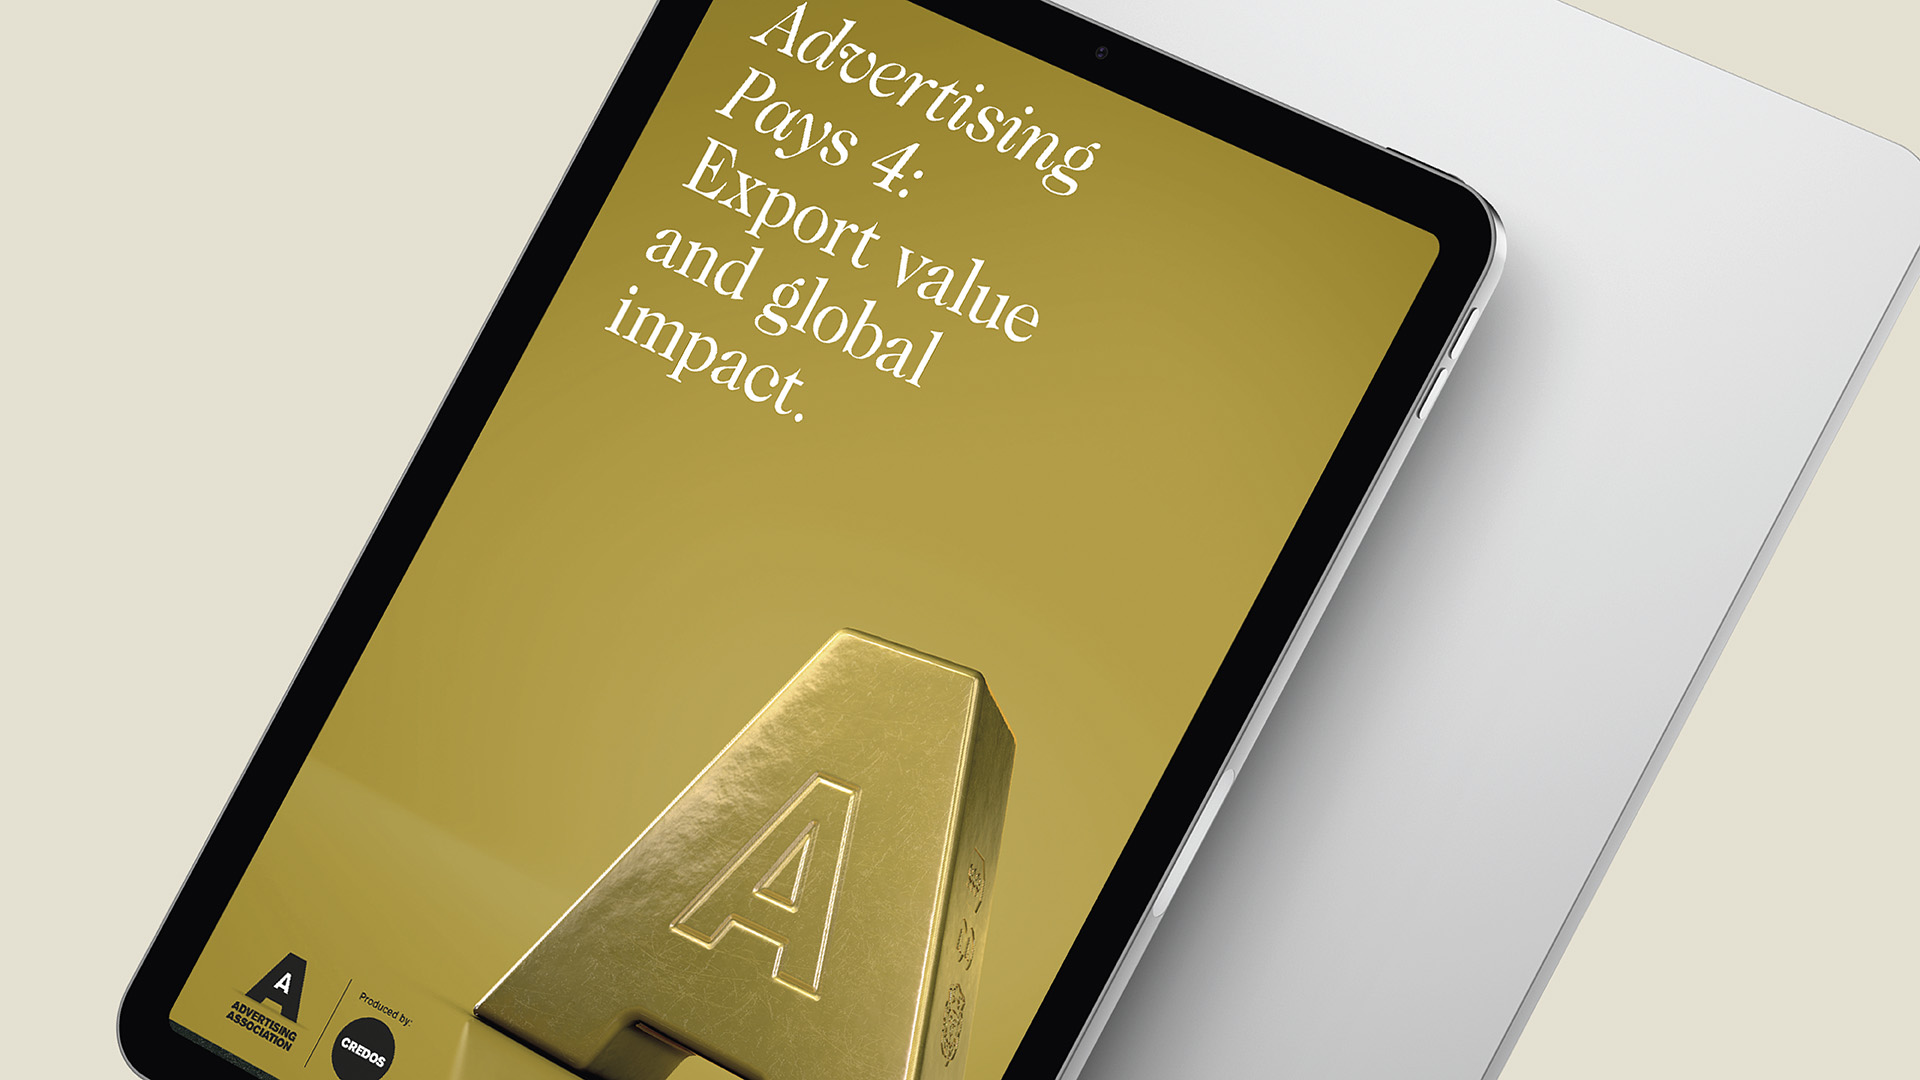 A mobile phone displaying the Advertising Association Ad Pays Report Cover with gold background and a three dimensional solid 'A' block with logos